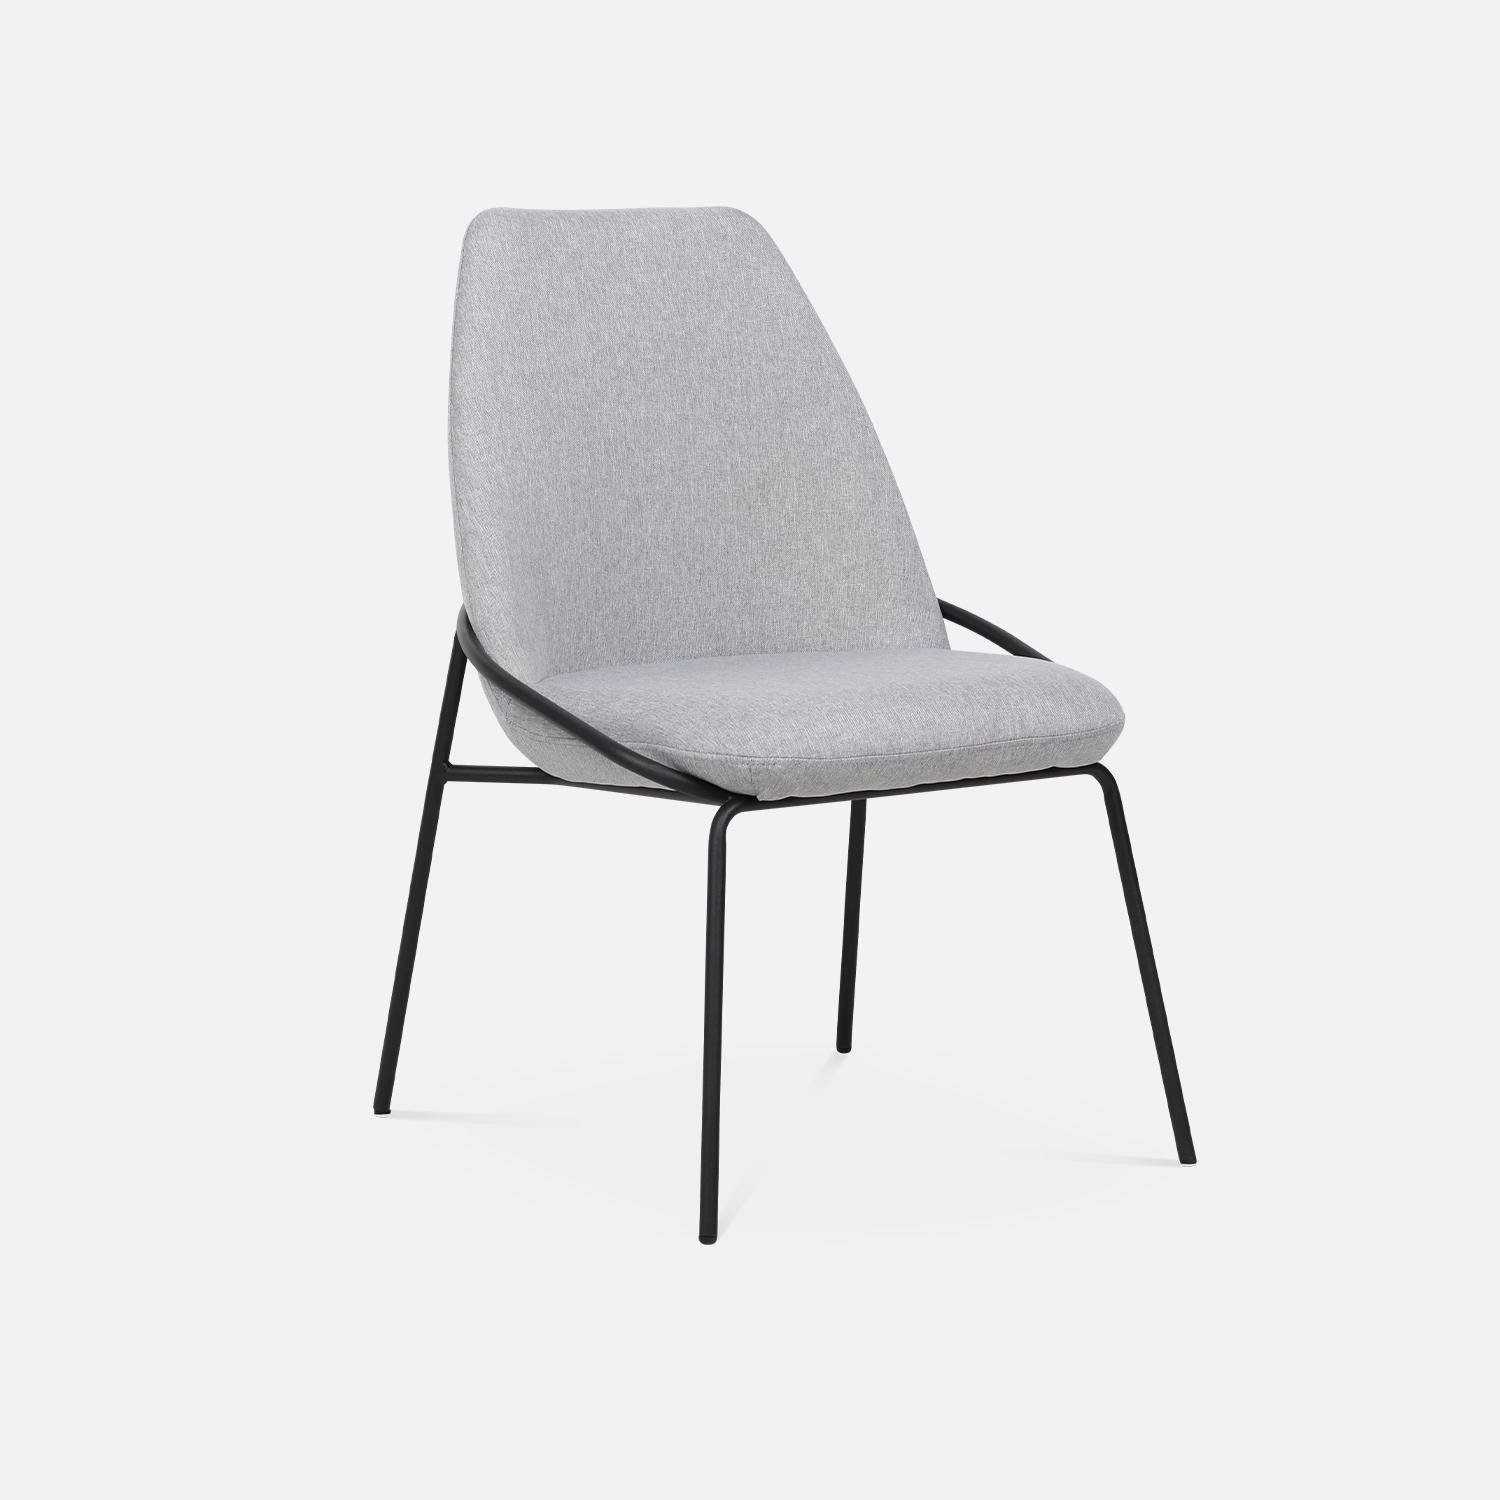 Retro-style metal and upholstered chair, 56.5x63x82.5cm, Lisbet, Light Grey Photo3